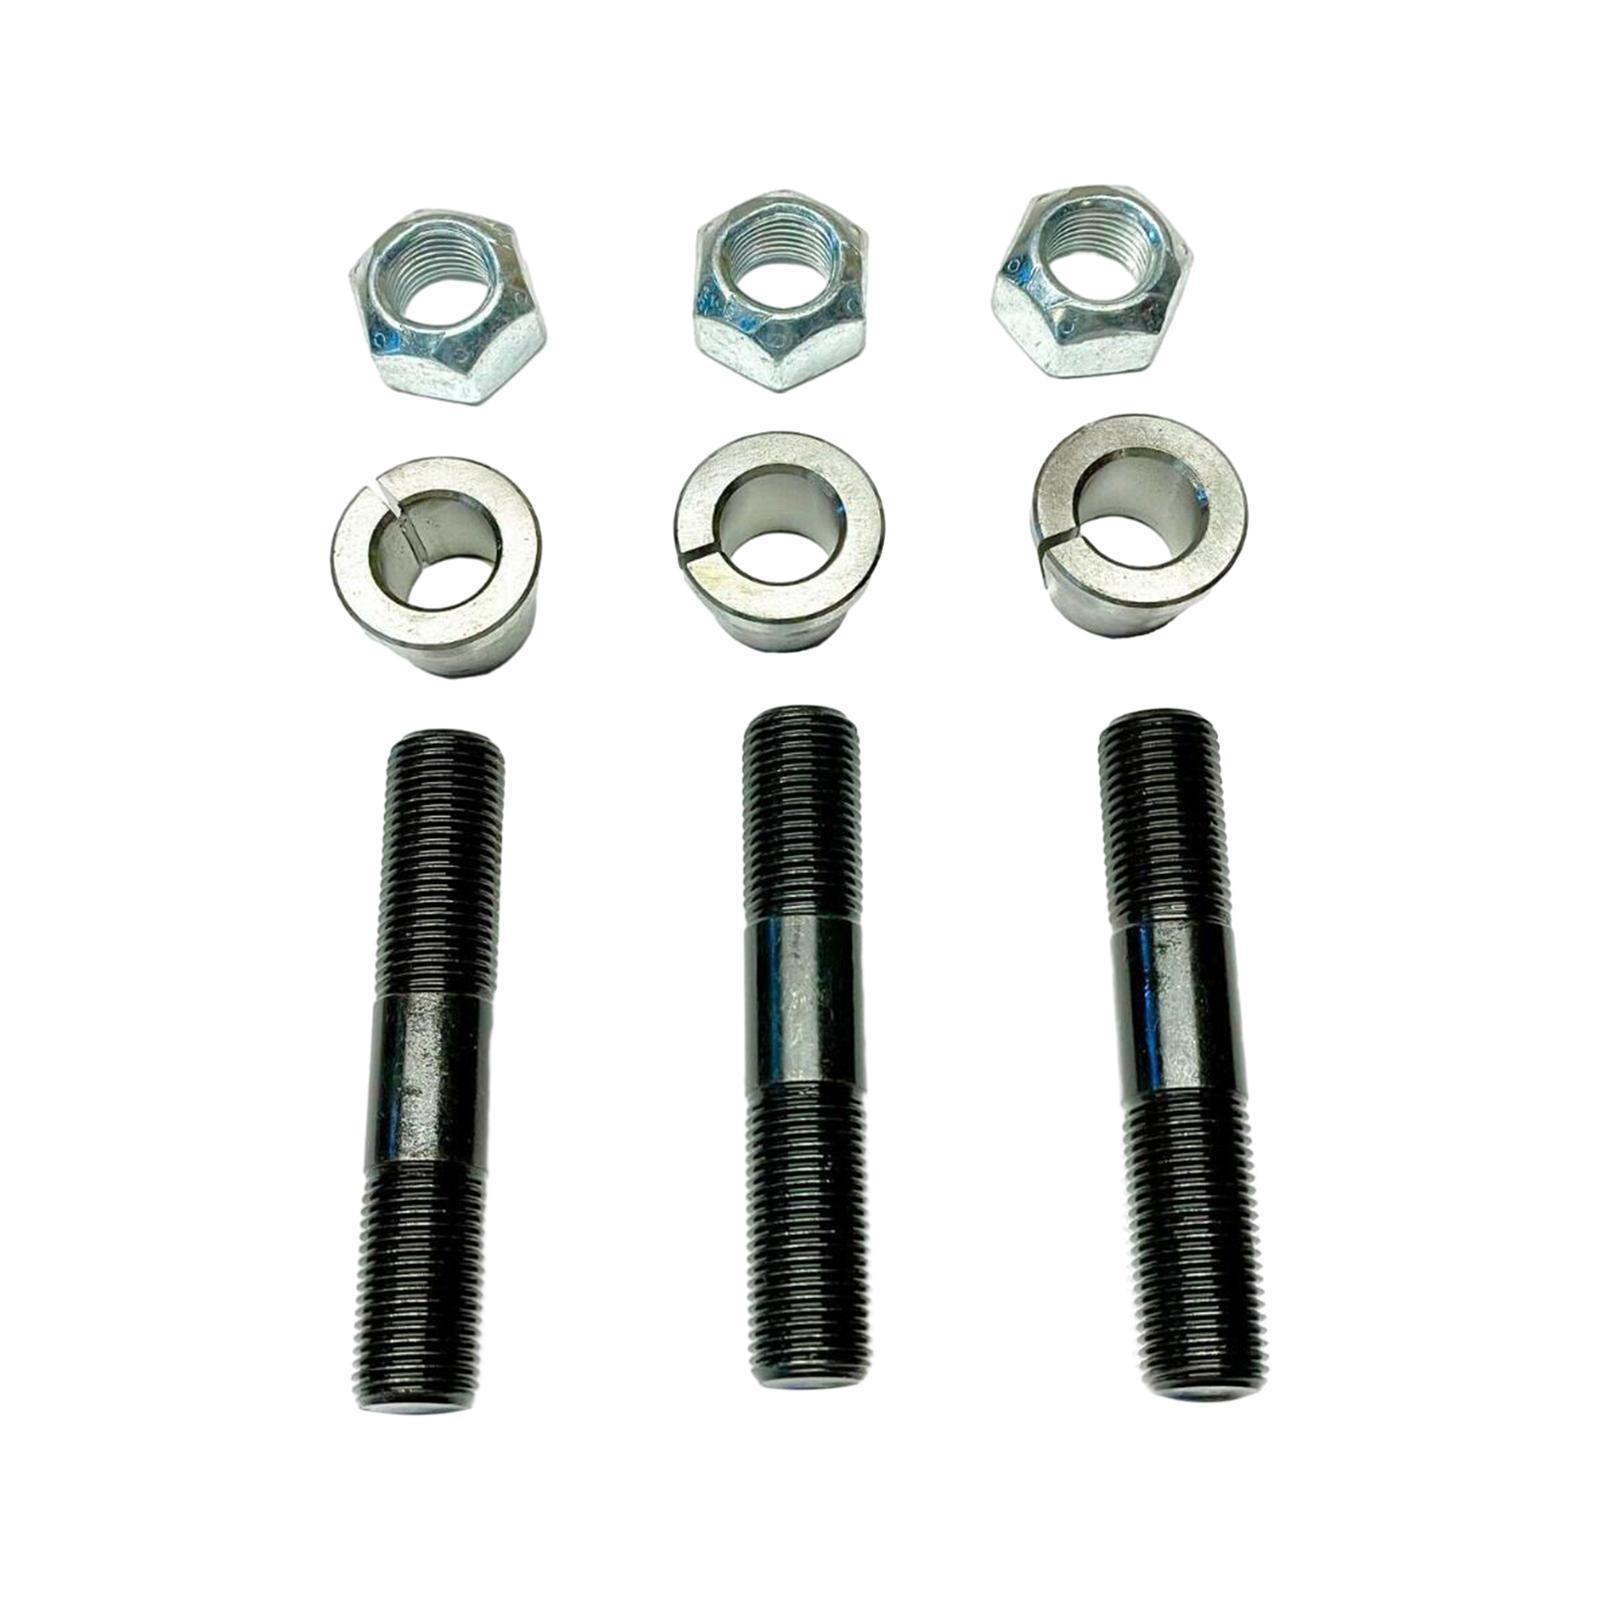 Steering Arm Install Kits,Lock Nut Mounting Stud Kits with Spacers